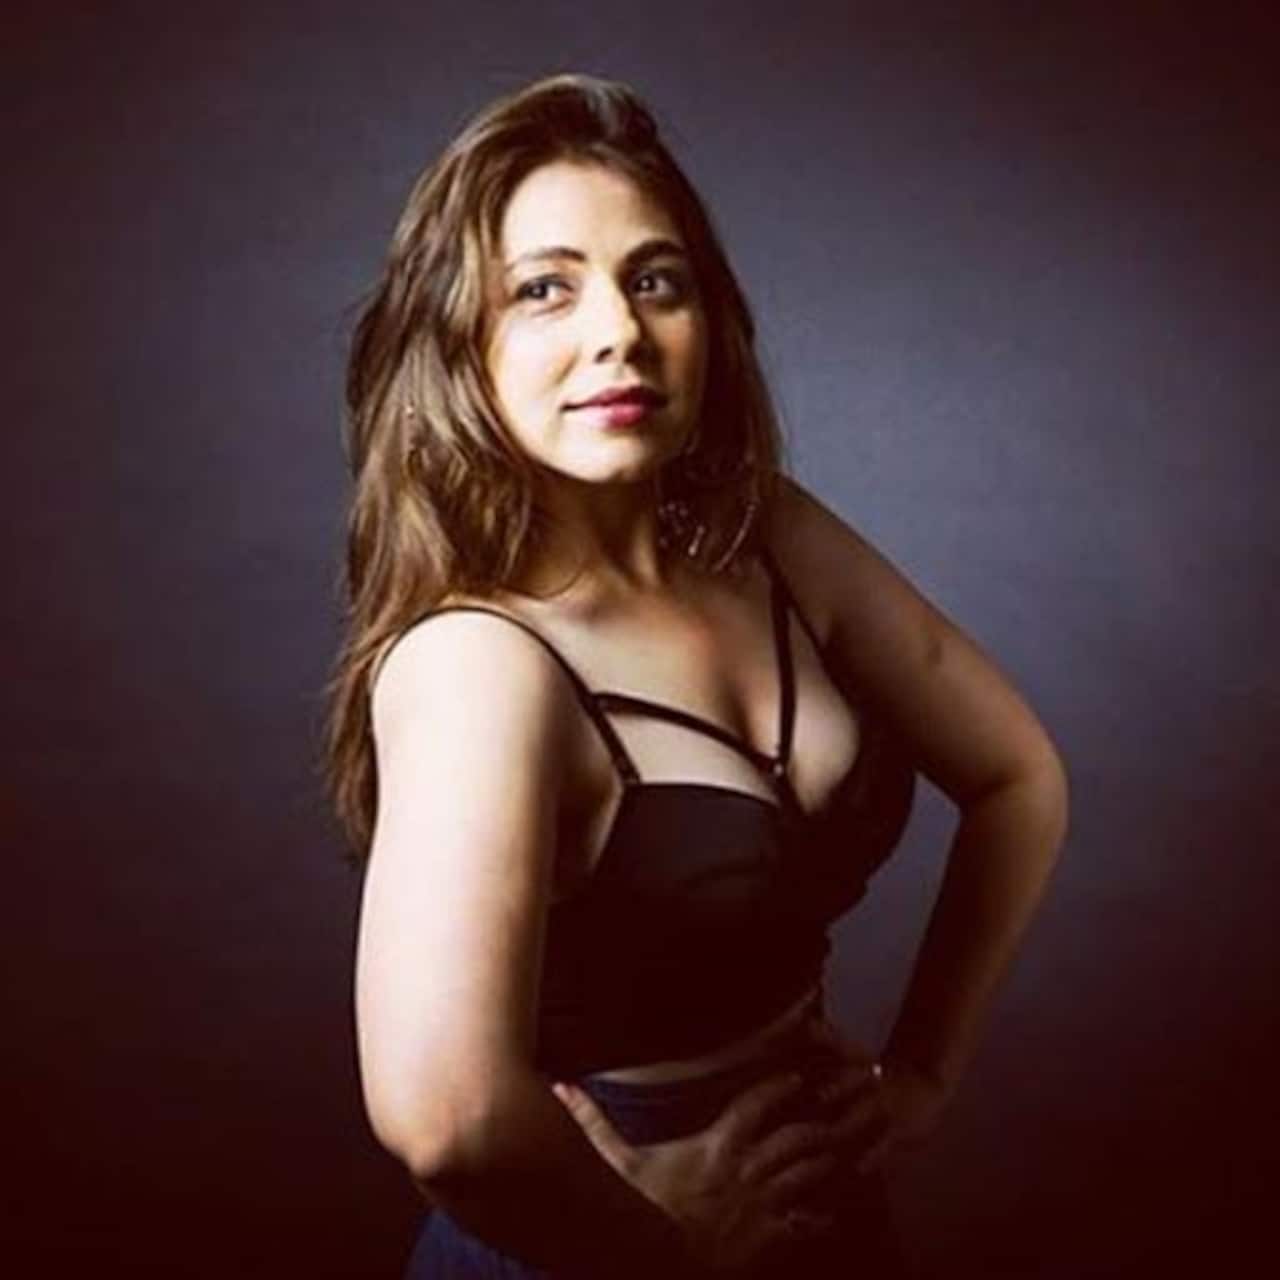 Here's what Maanvi Gagroo did when a producer asked her to 'compromise' for work